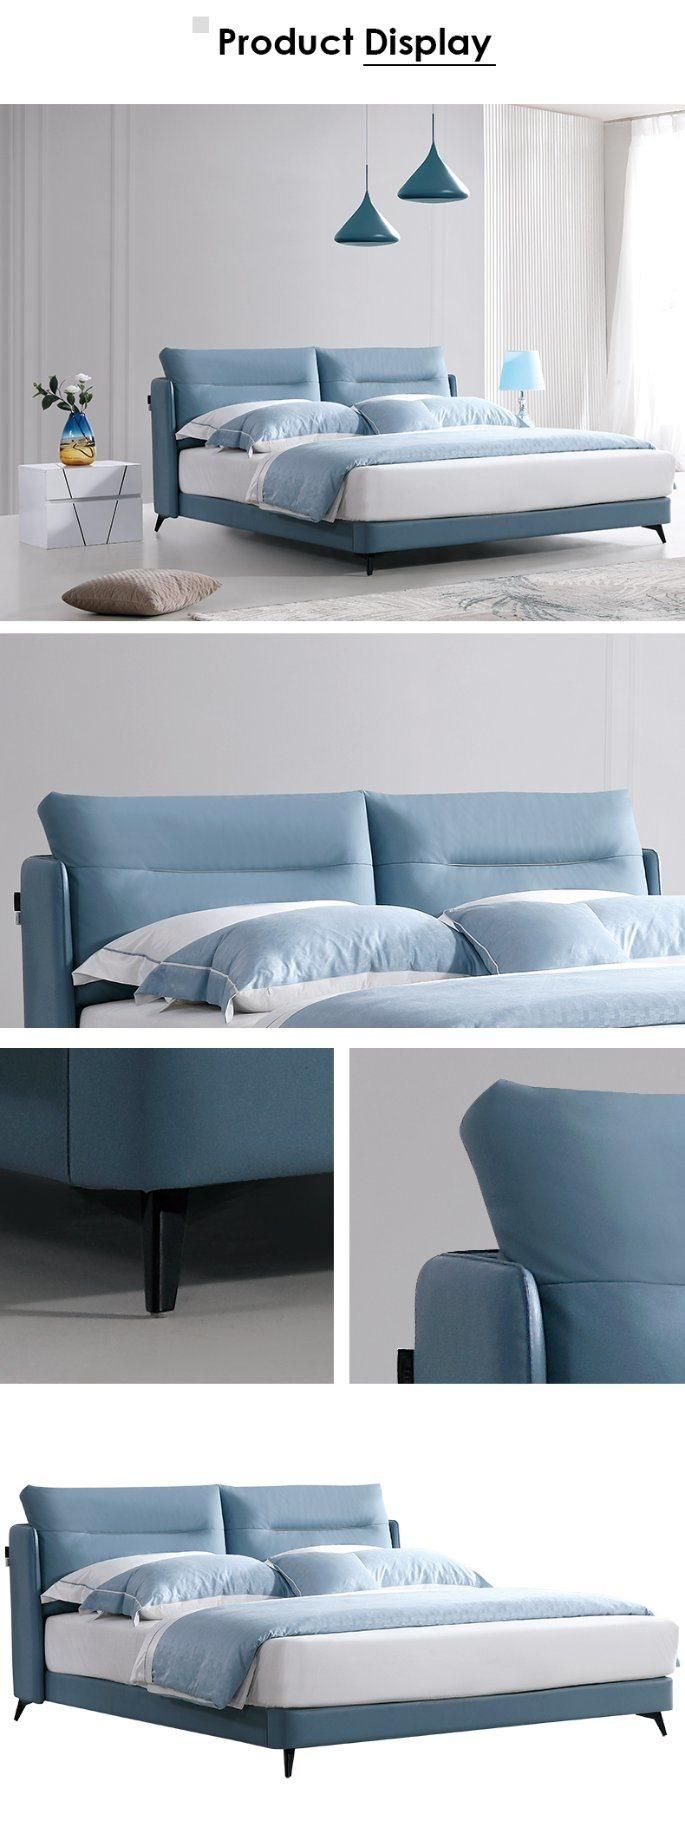 Modern Home Bedroom Furniture Set Queen Size Blue Leather Bed